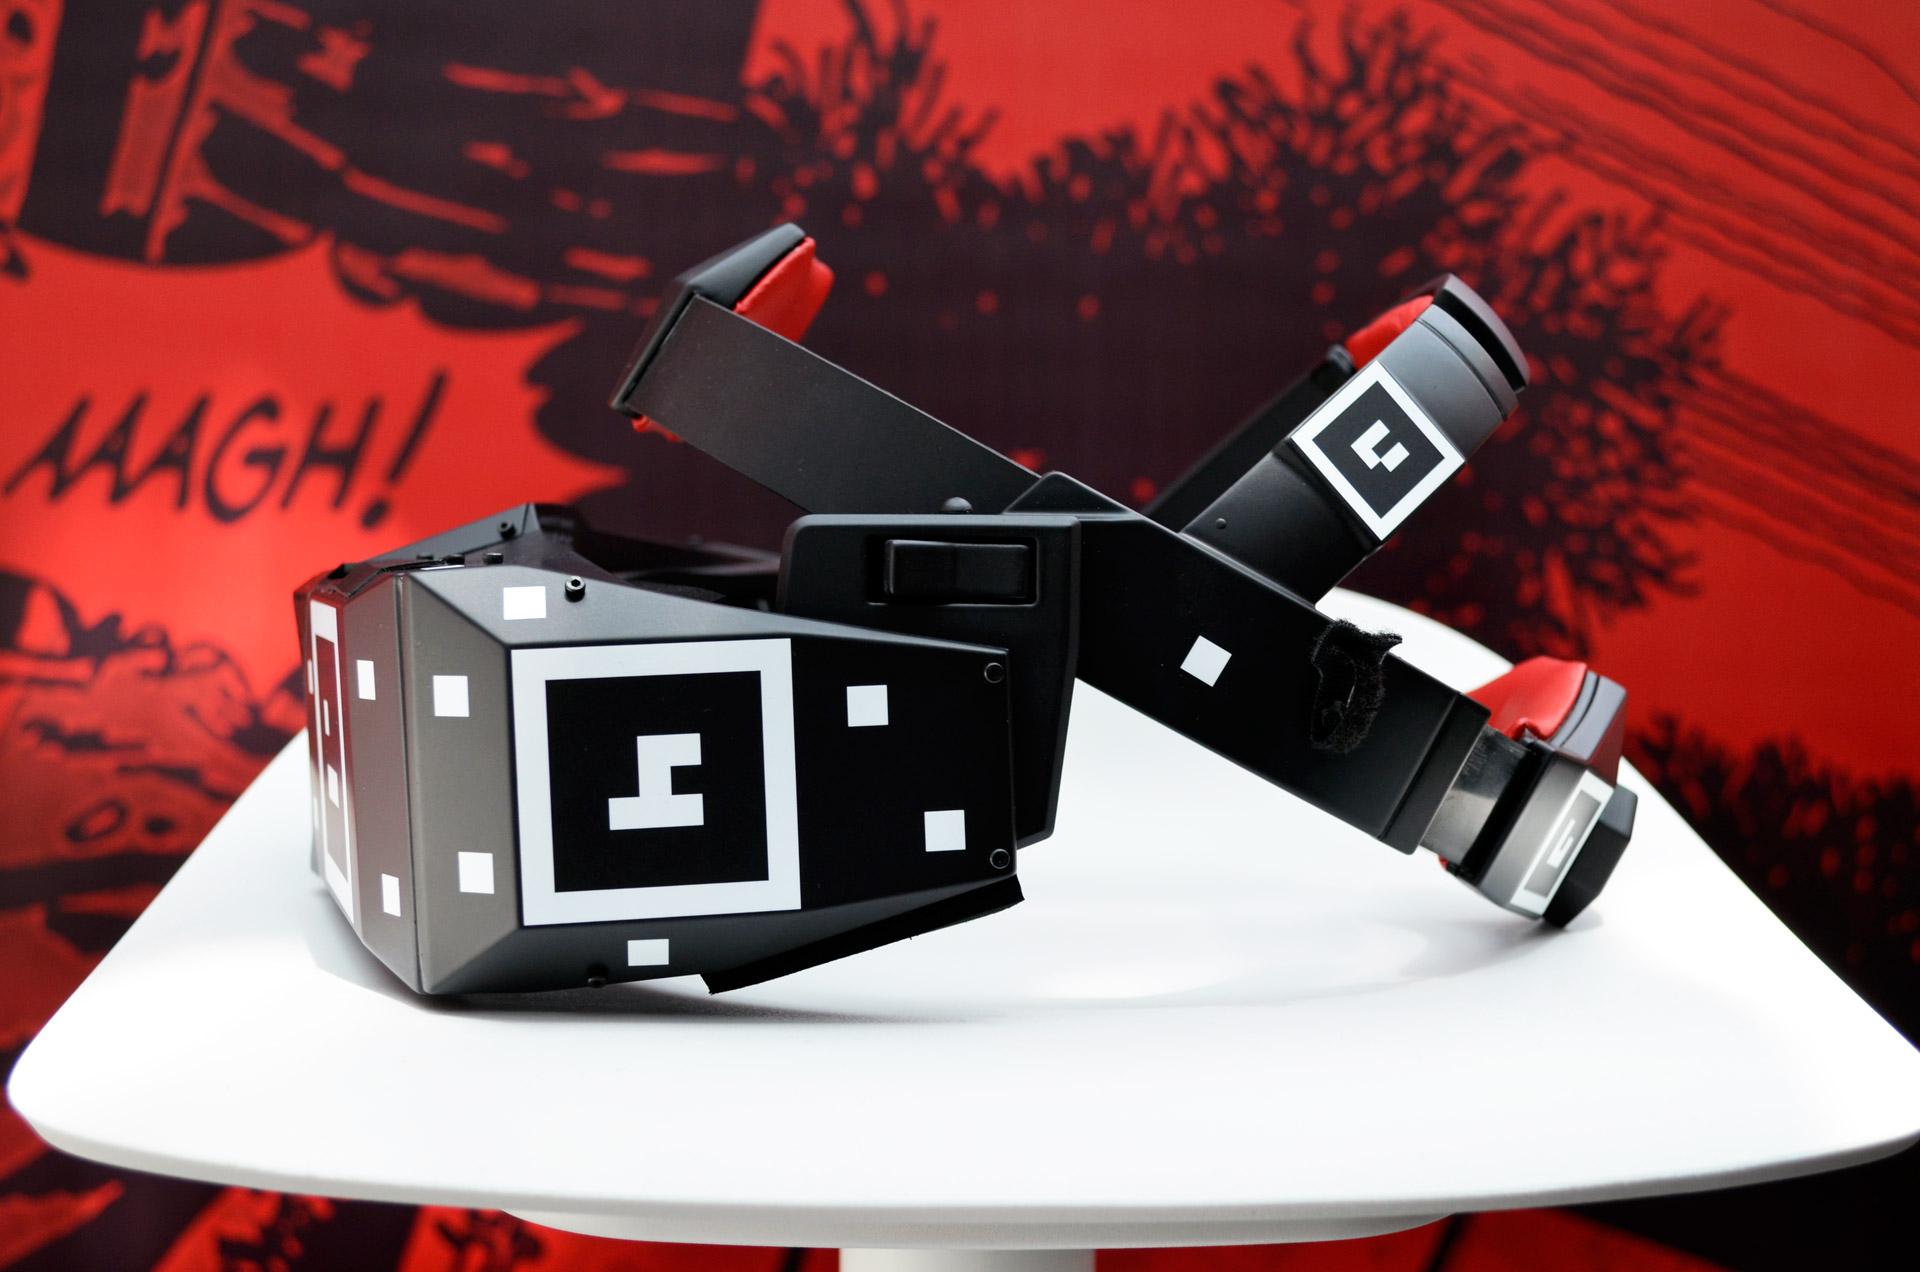 StarVR 210-Degree VR Headset to Receive Eye-tracking Support Courtesy of Tobii – Road to VR